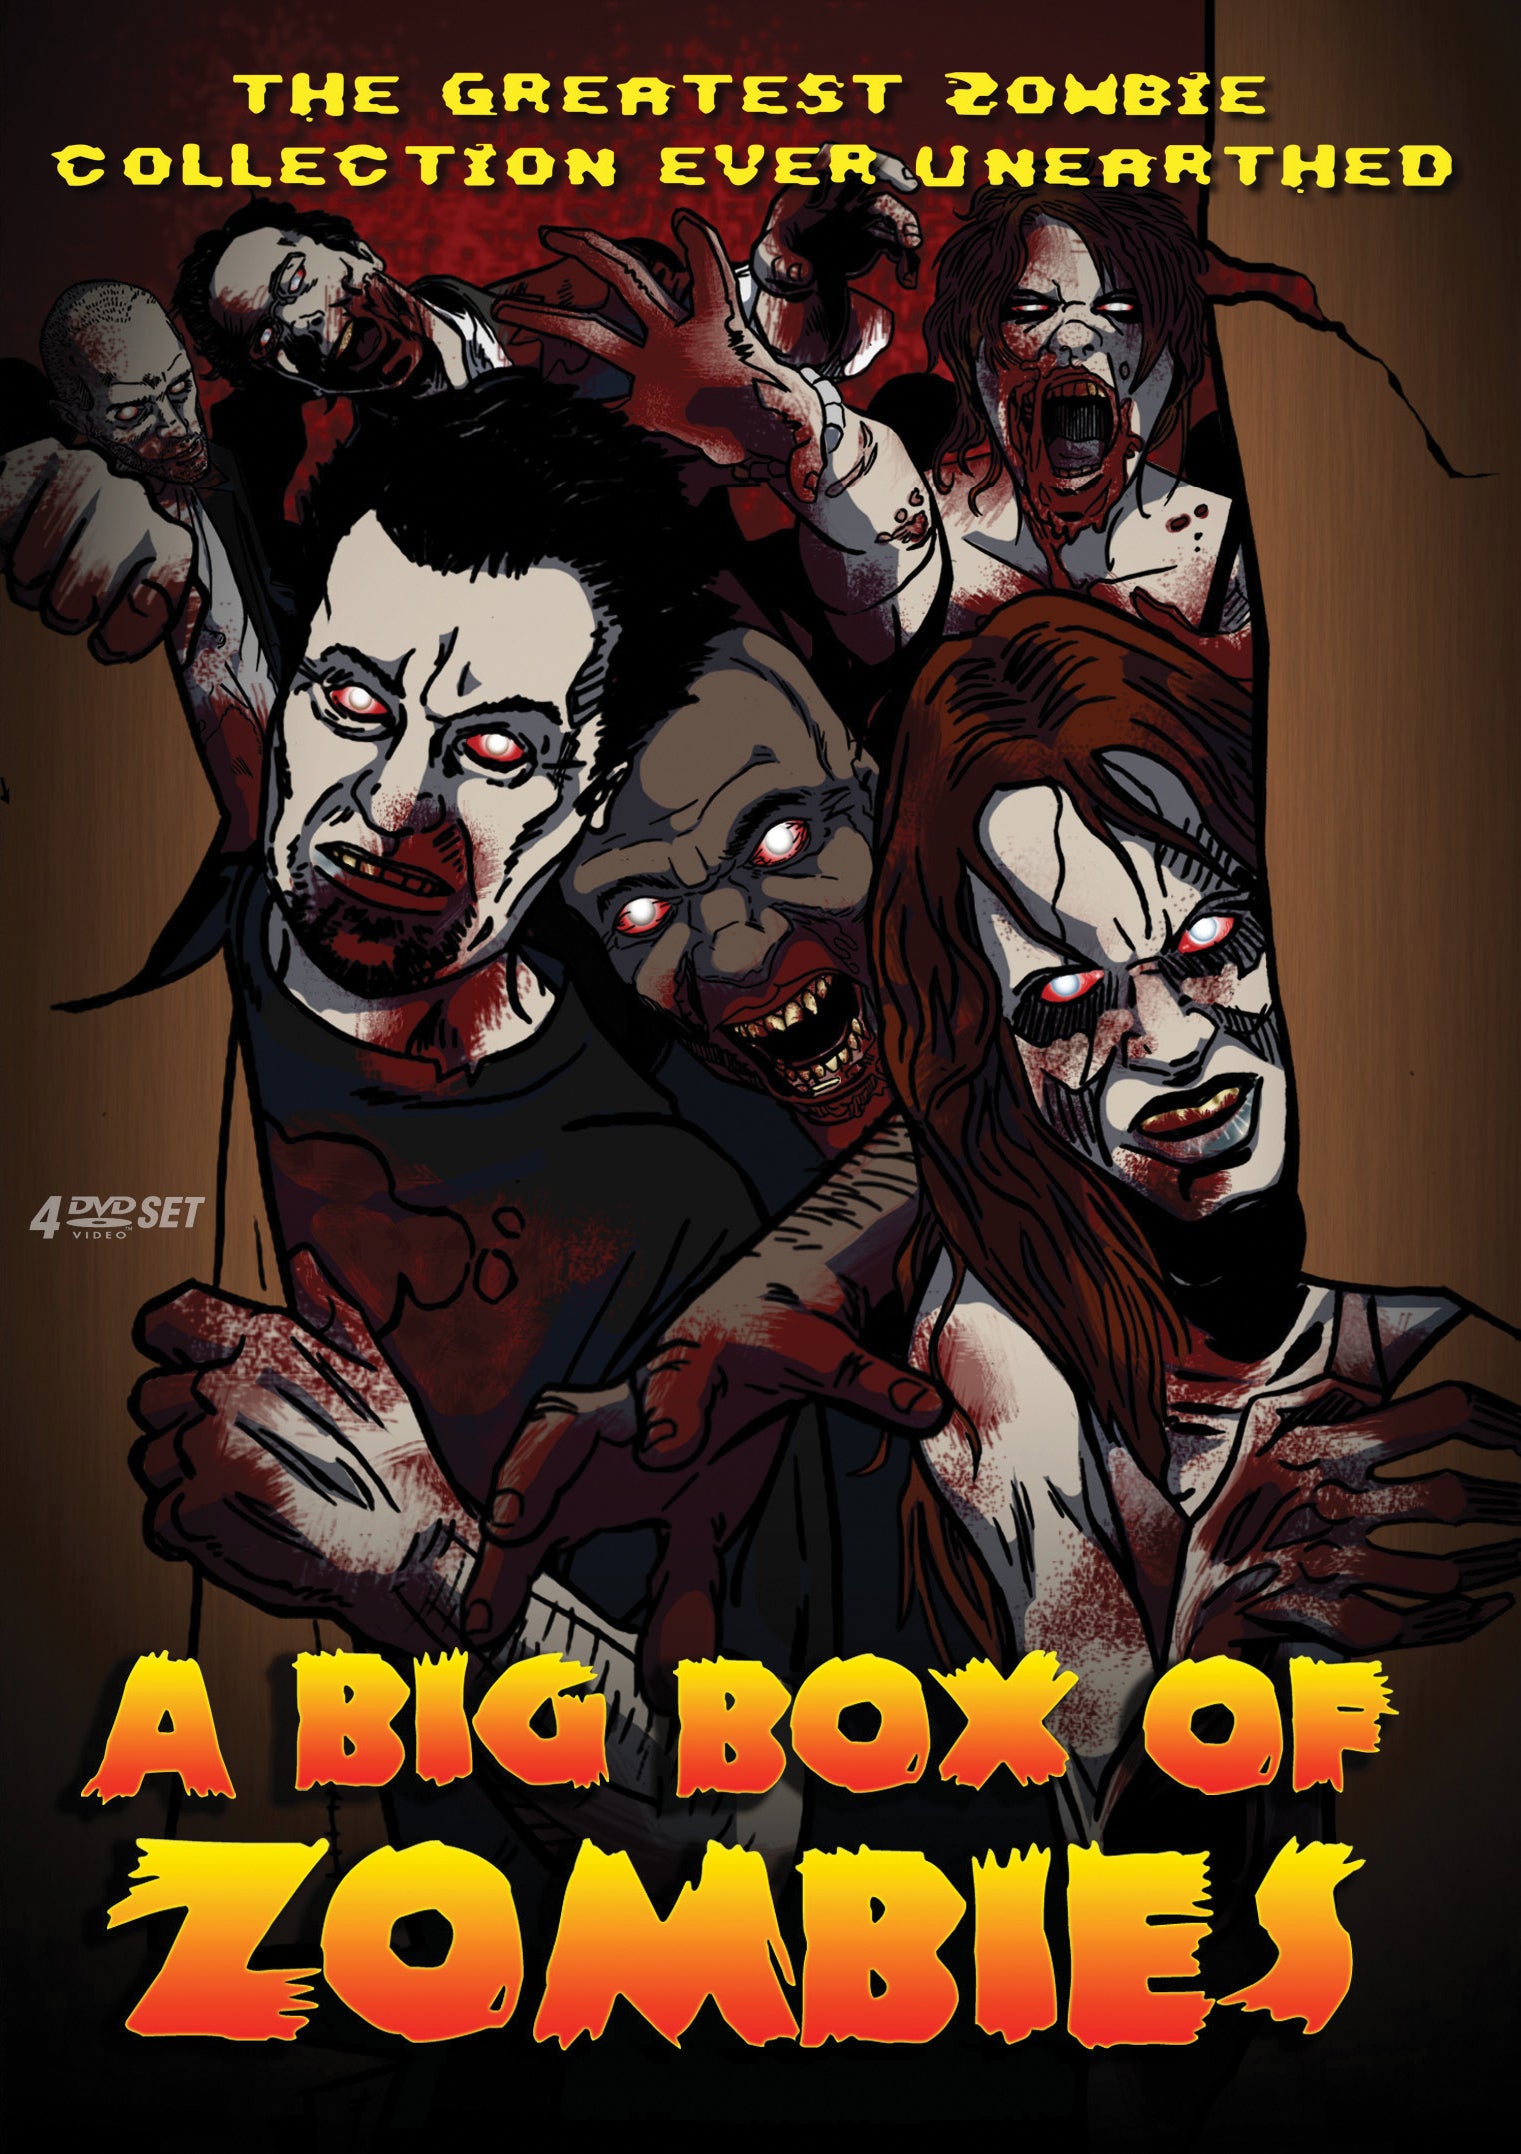 A BIG BOX OF ZOMBIES DVD